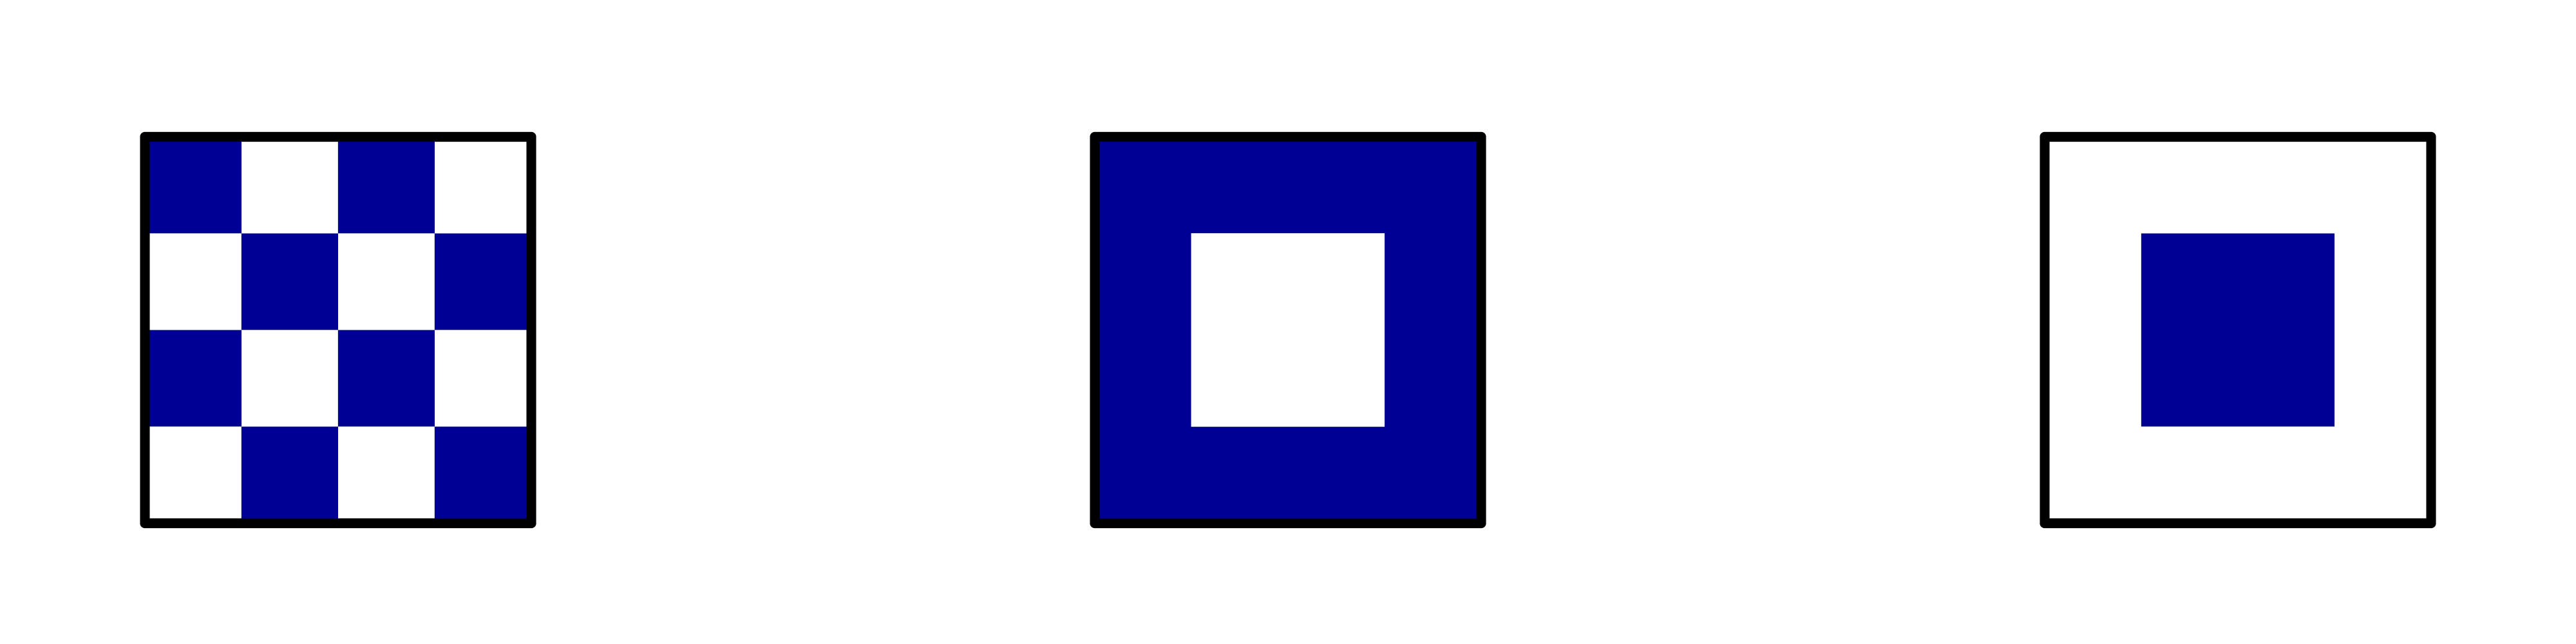 Three square flags in a row: A 4x4 checker flag of white and blue, a blue flag with a white square, and a white flag with a blue square.